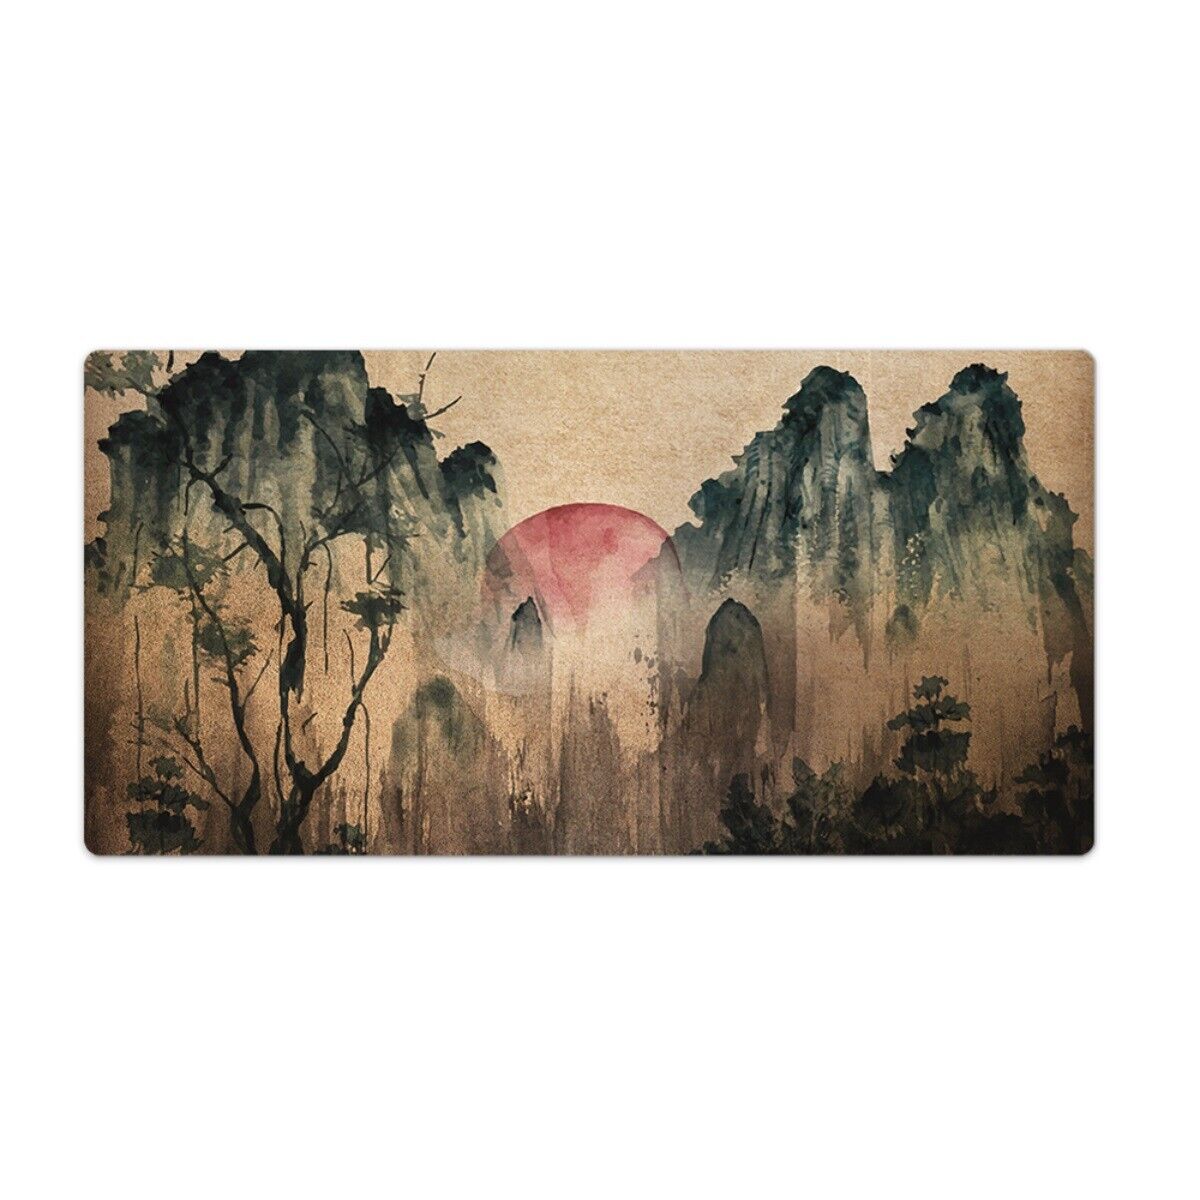 Mouse Pad Mat For Desk PC Laptop Keyboard Sunset Forest 90x45